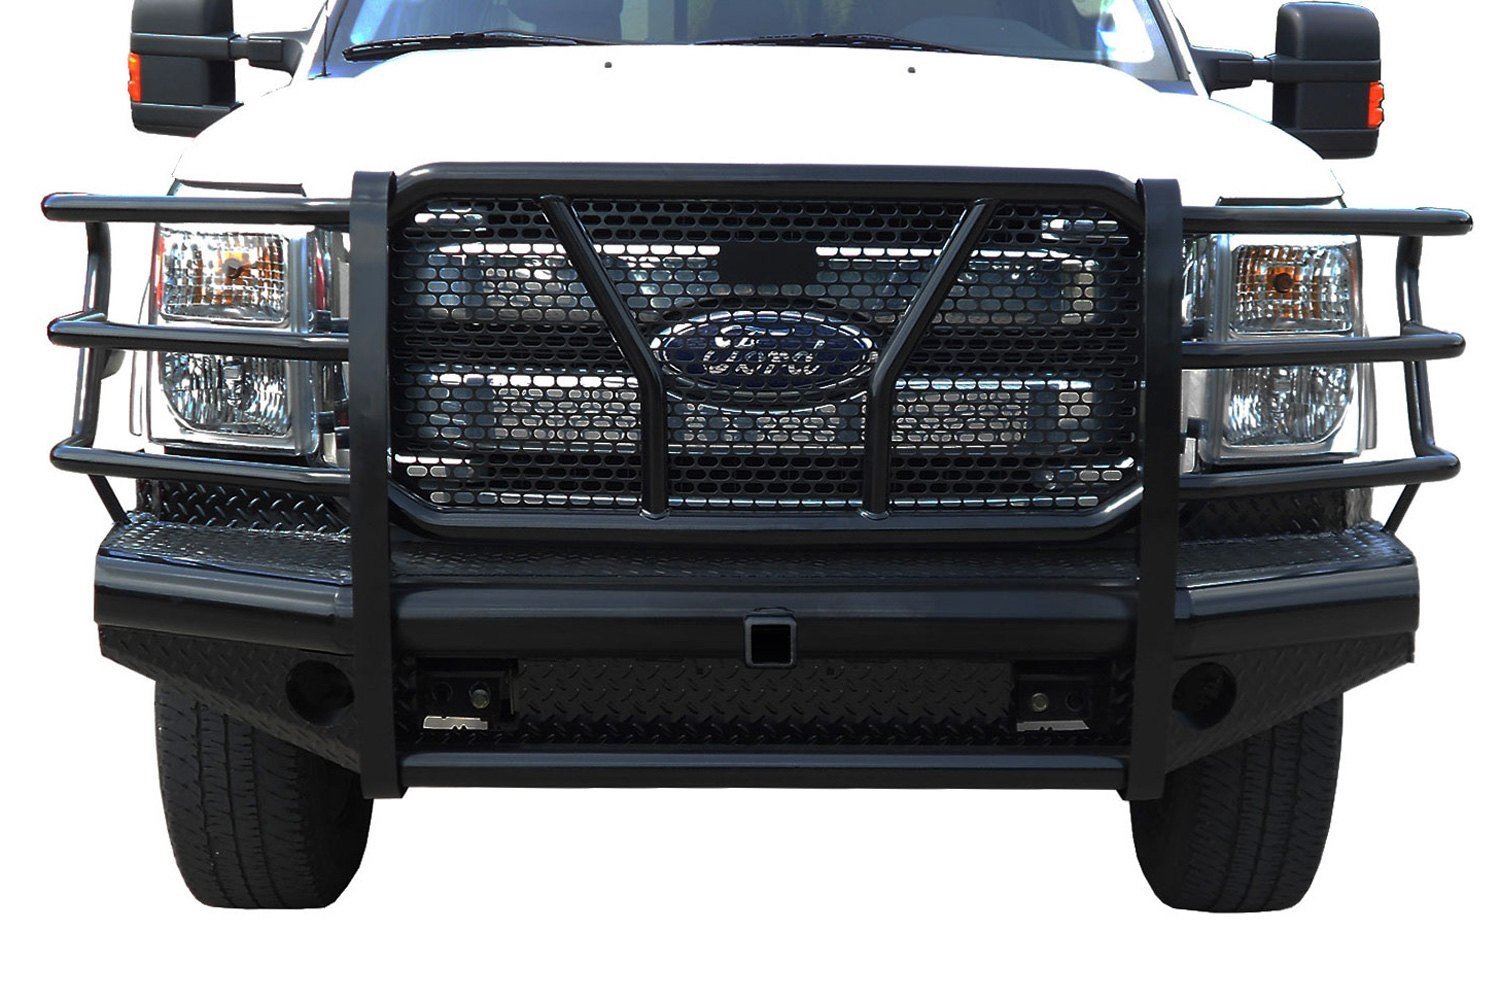 Full-Width Front HD Bumper with Grille Guard and Hitch Receiver for 2011-2016 Ford F-250/F-350 Trucks